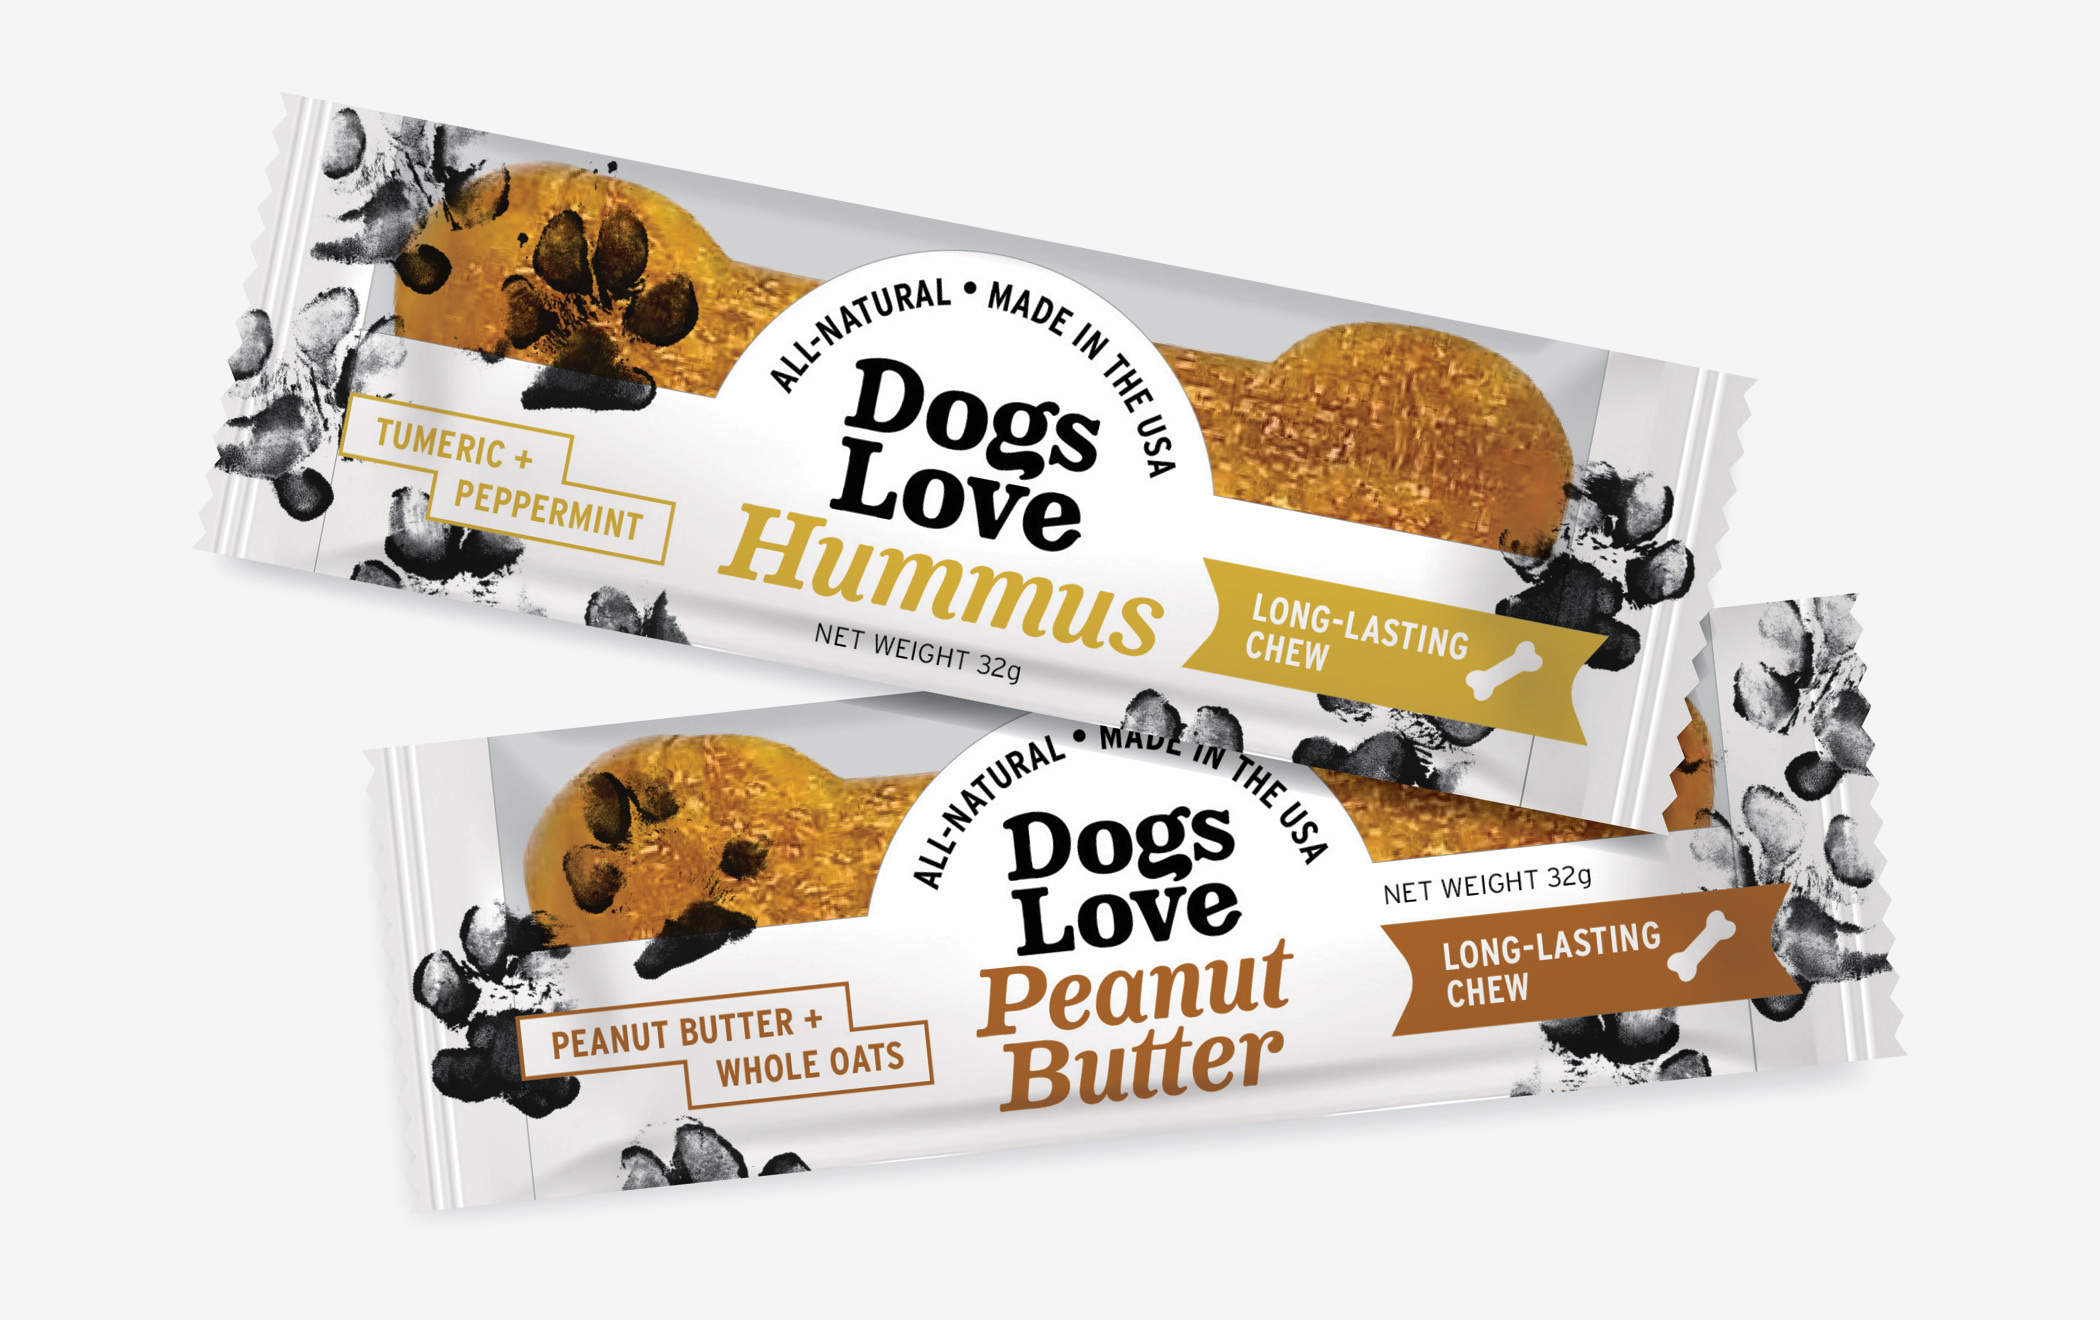 Dogs Love Us long lasting chew treat packages for Hummus and Peanut Butter flavors.